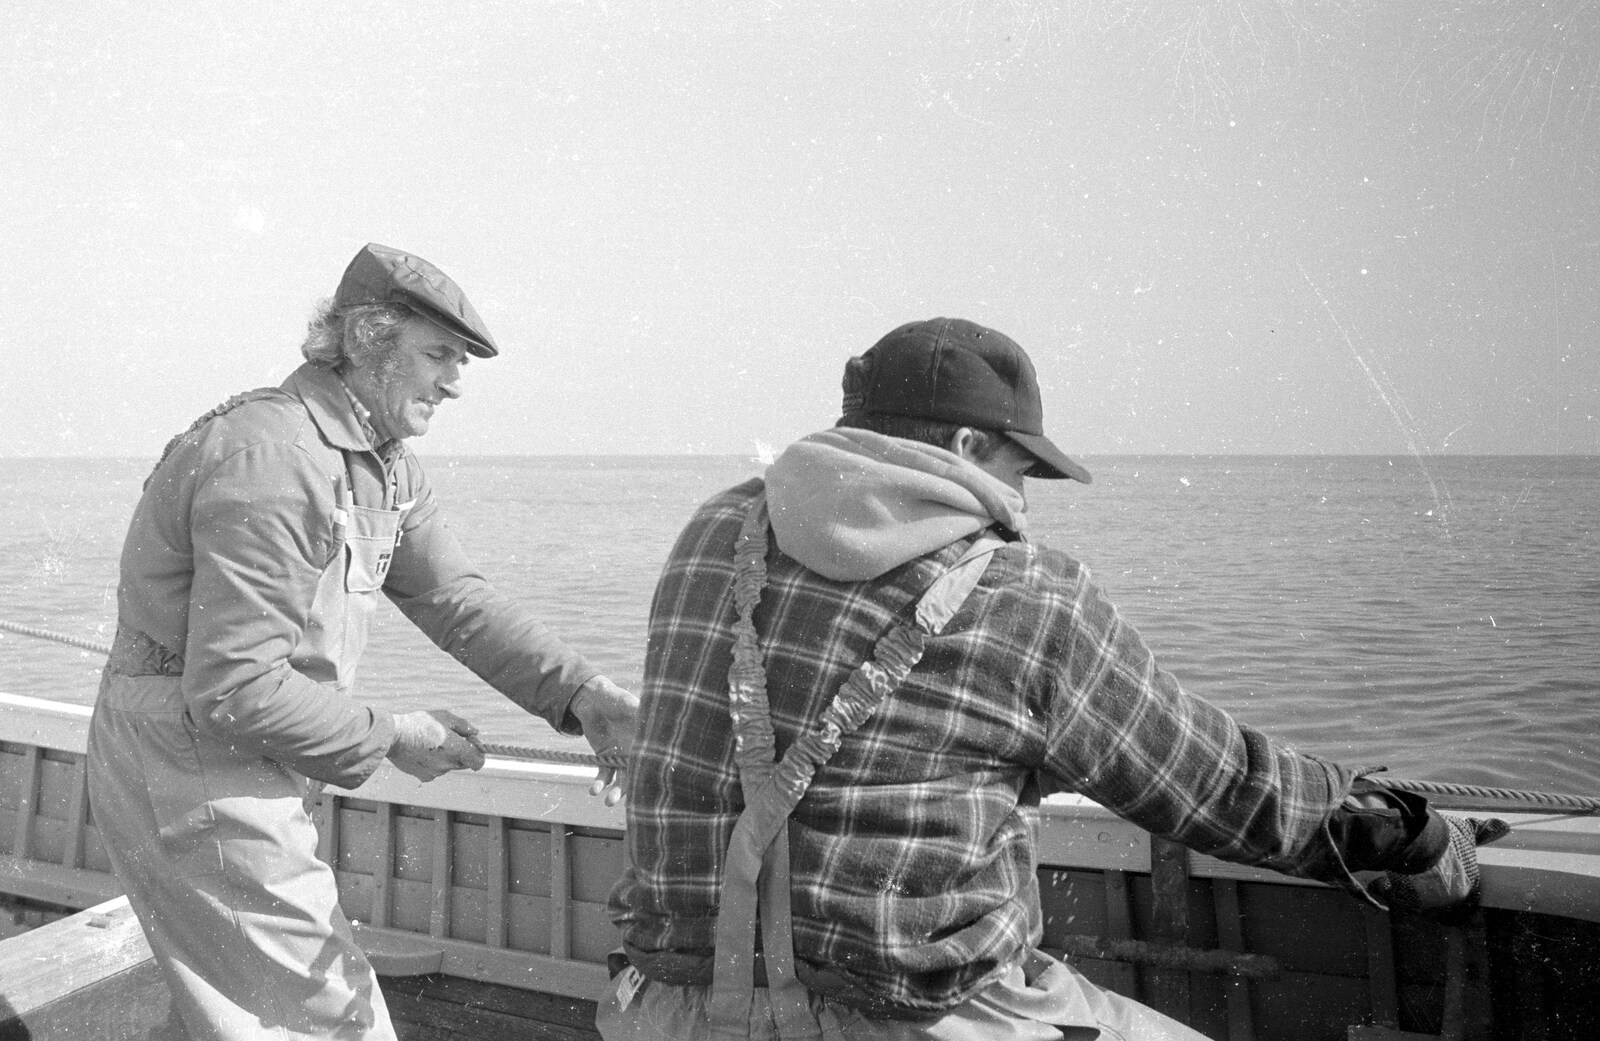 Peter and Ben start to haul the nets in from A Fishing Trip on the Linda M, Southwold, Suffolk - 25th April 1993